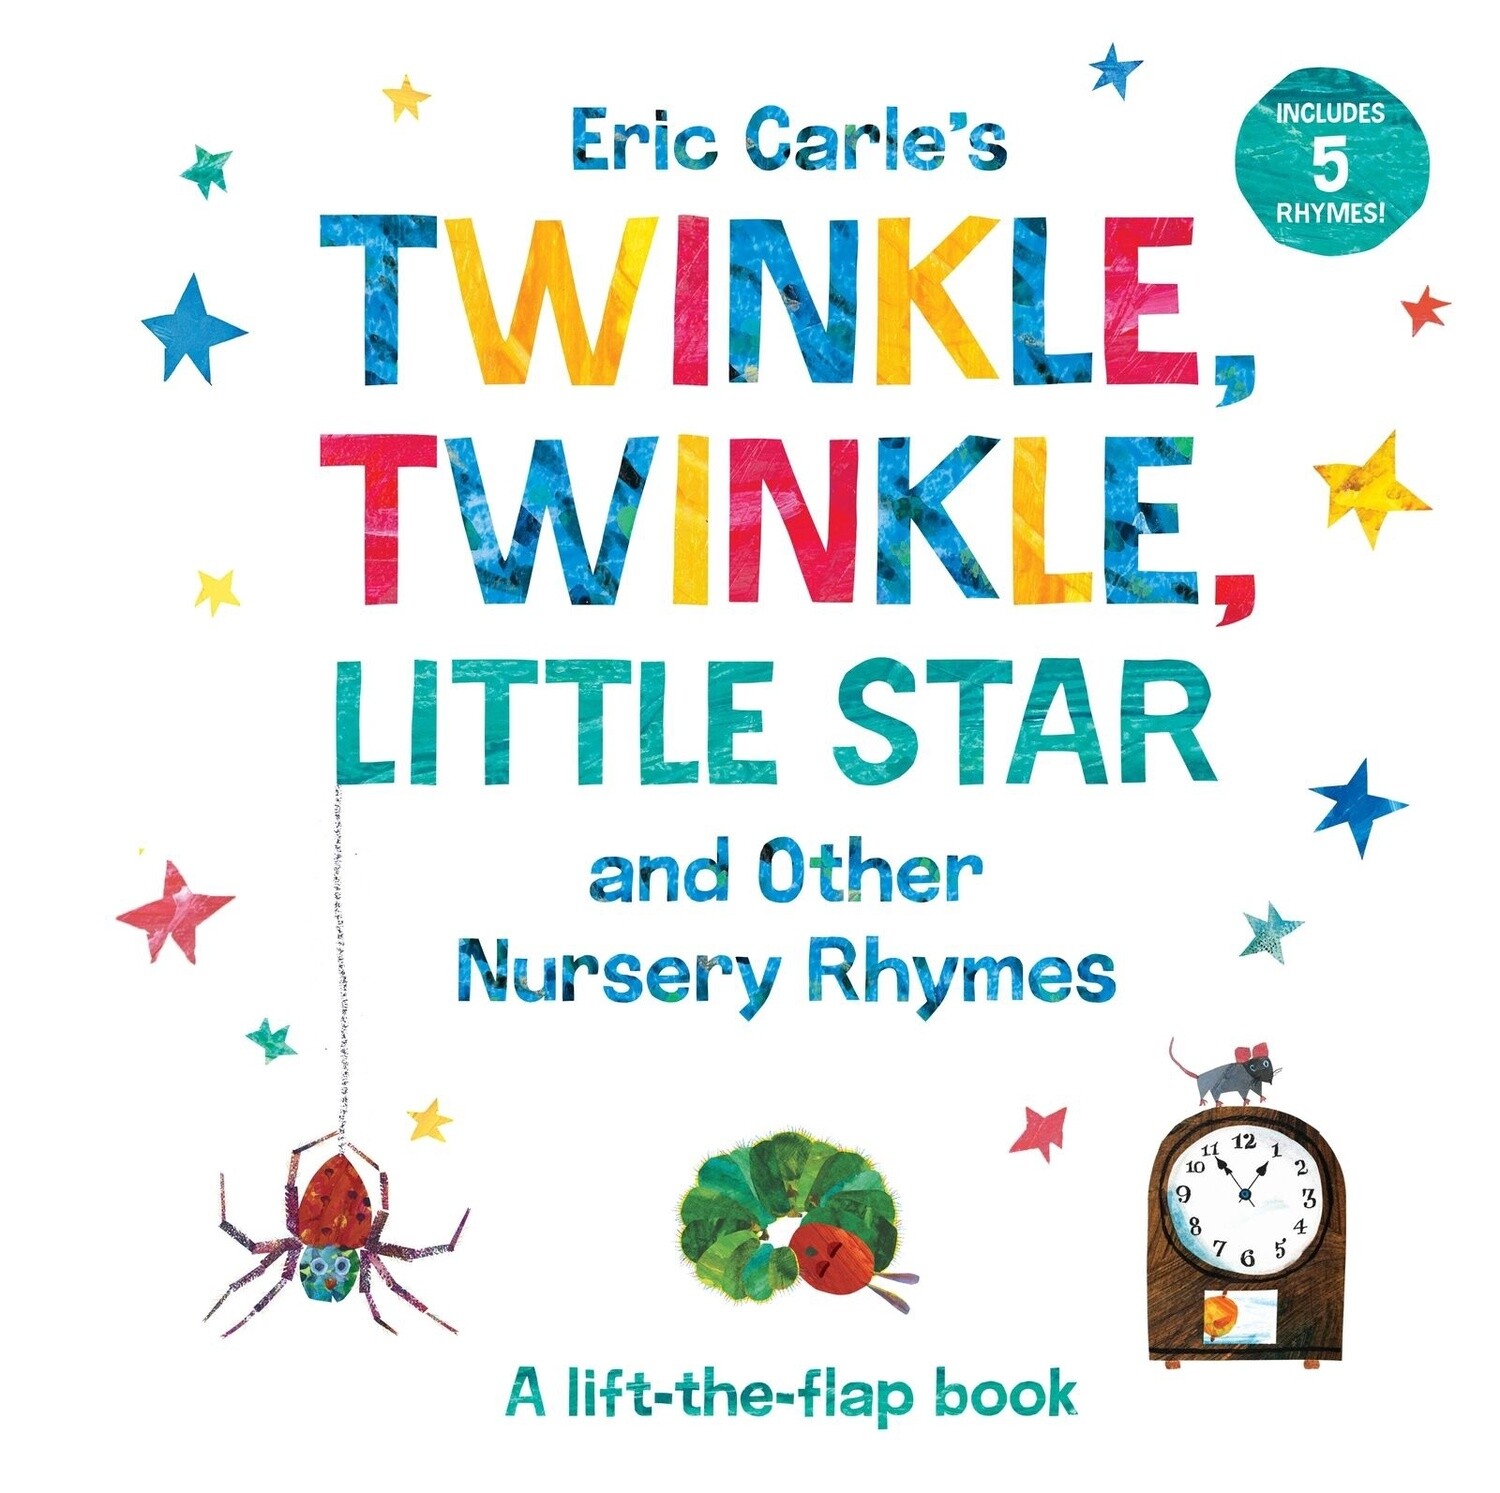 Eric Carle's Twinkle Twinkle Little Star and Other Nursery Rhymes